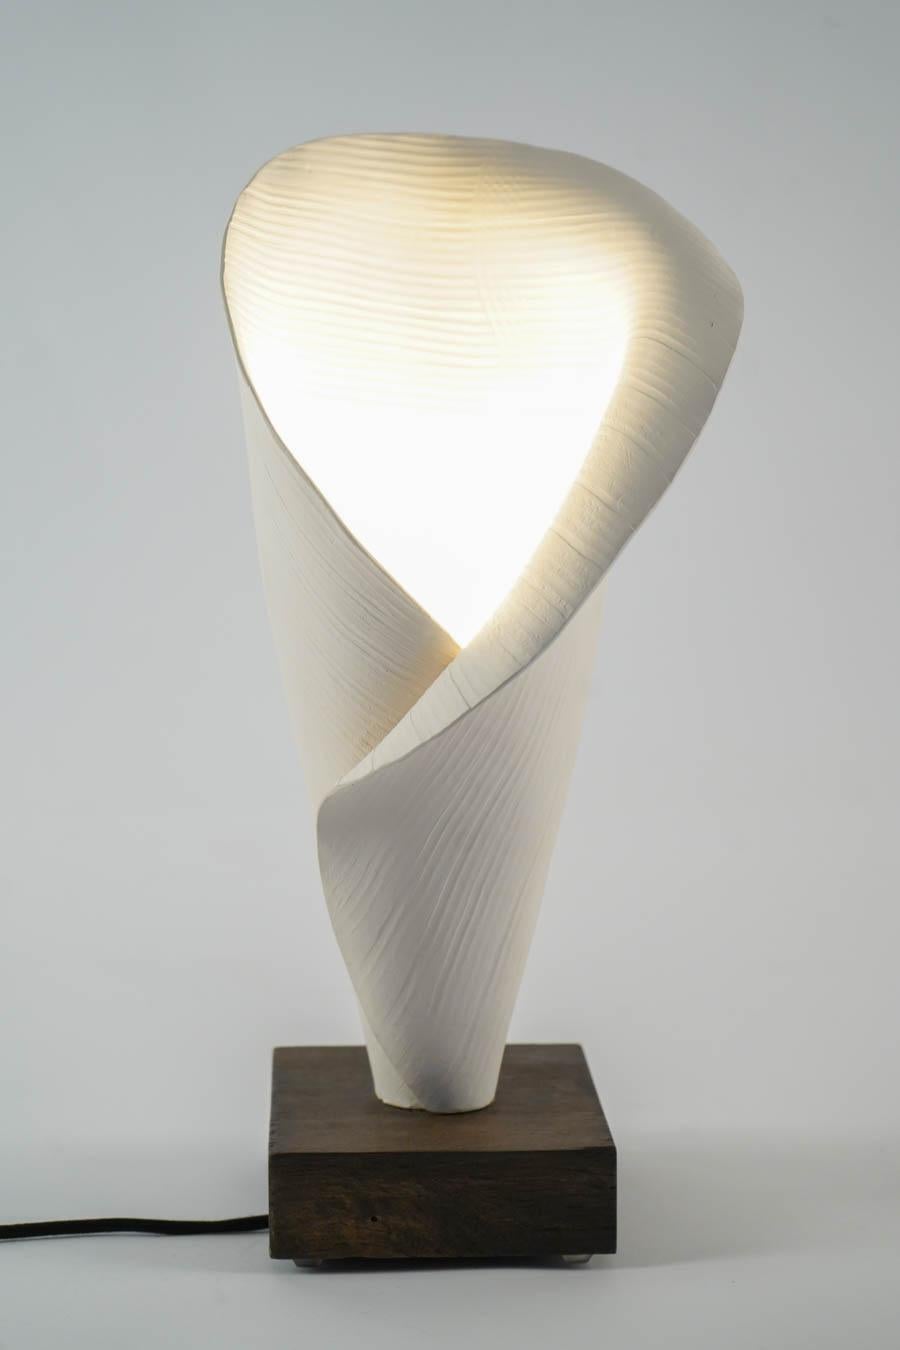 Contemporary Pair of Table Lamps, White Ceramic Lamp Made by Hand Mounted on Solid Oak